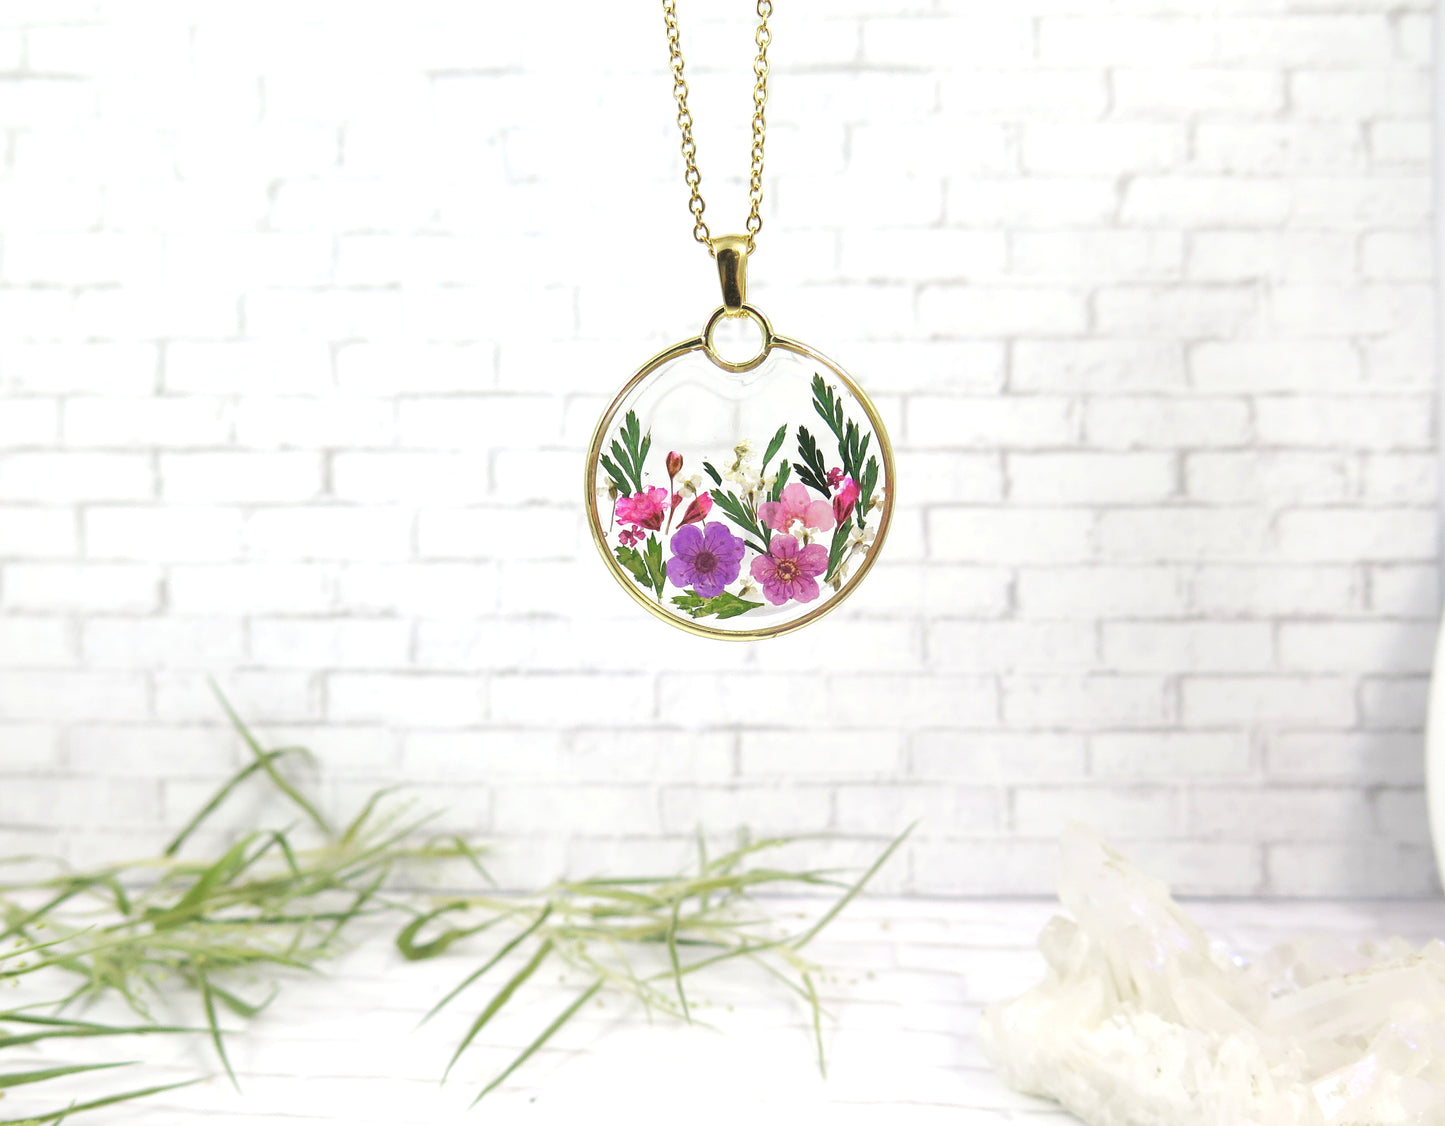 Small dried flowers necklace Handmade resin jewelry